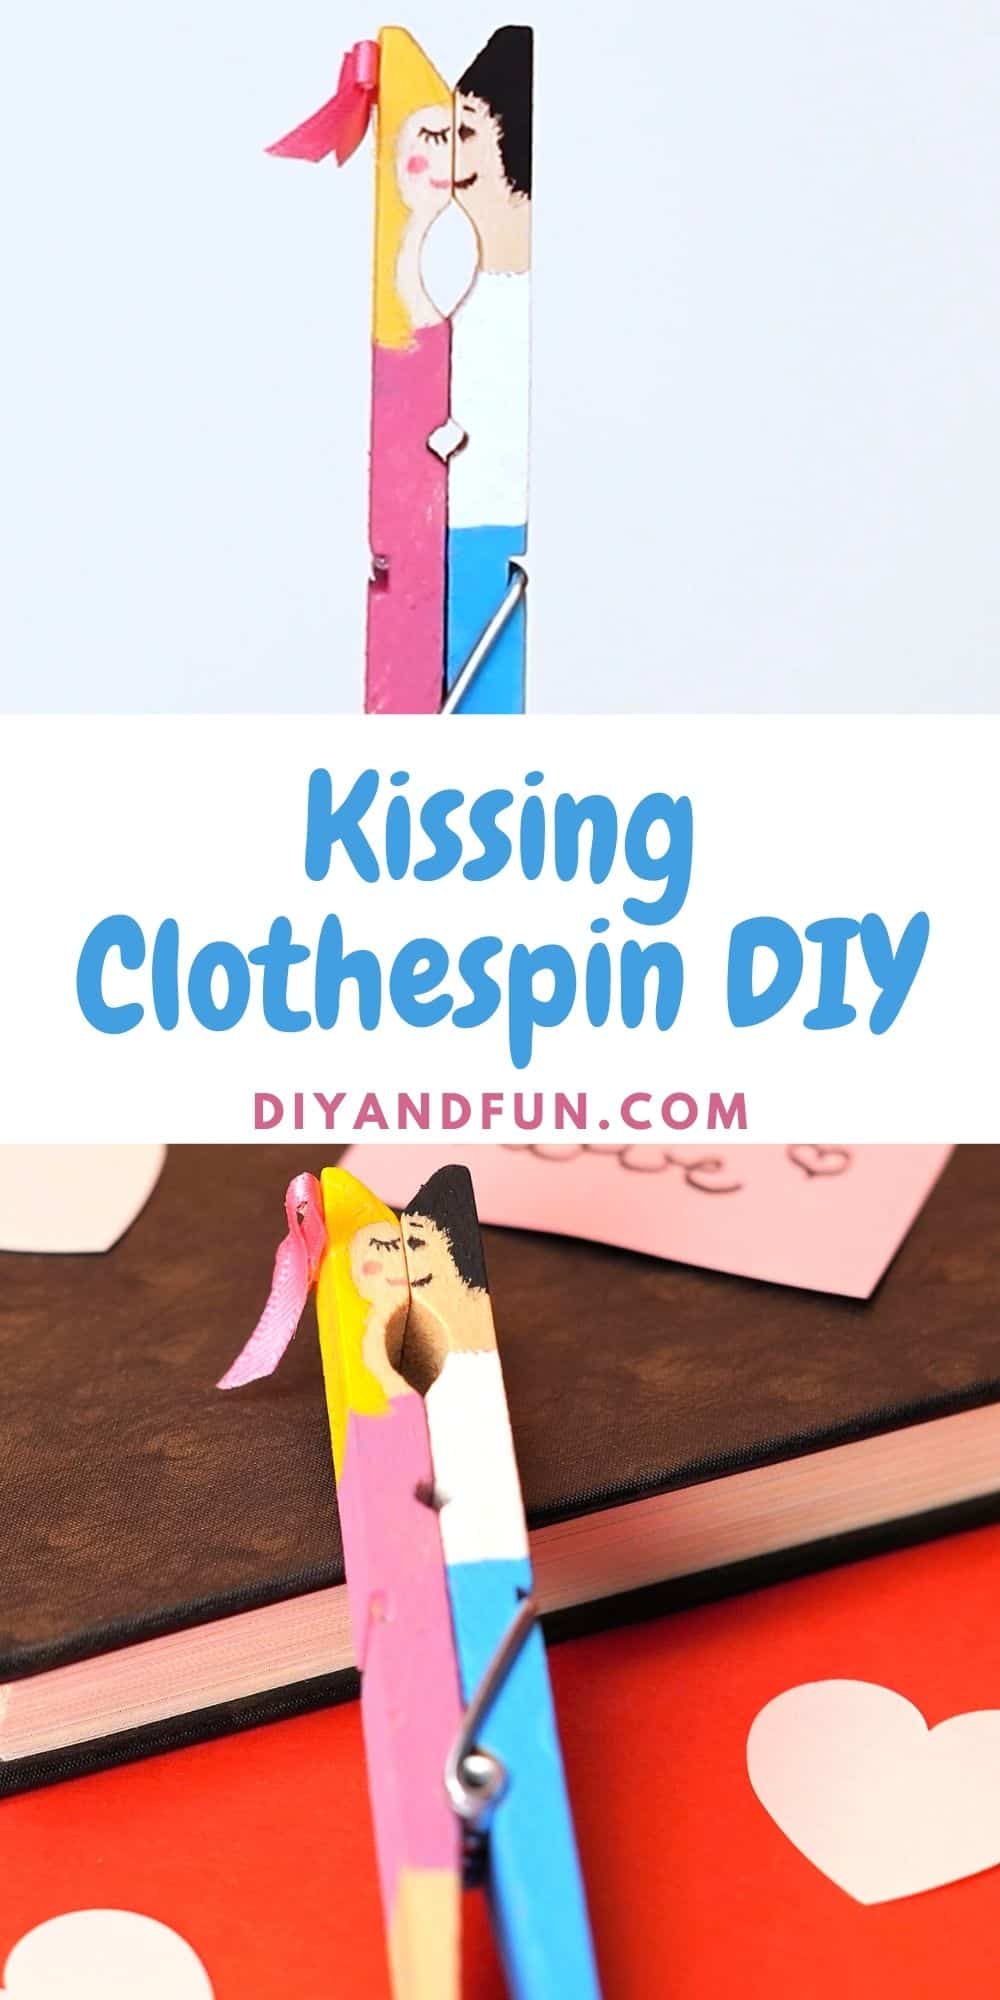 Kissing Clothespin DIY, a simple homemade craft project idea for turning an old fashion clothes pin into a loving couple.